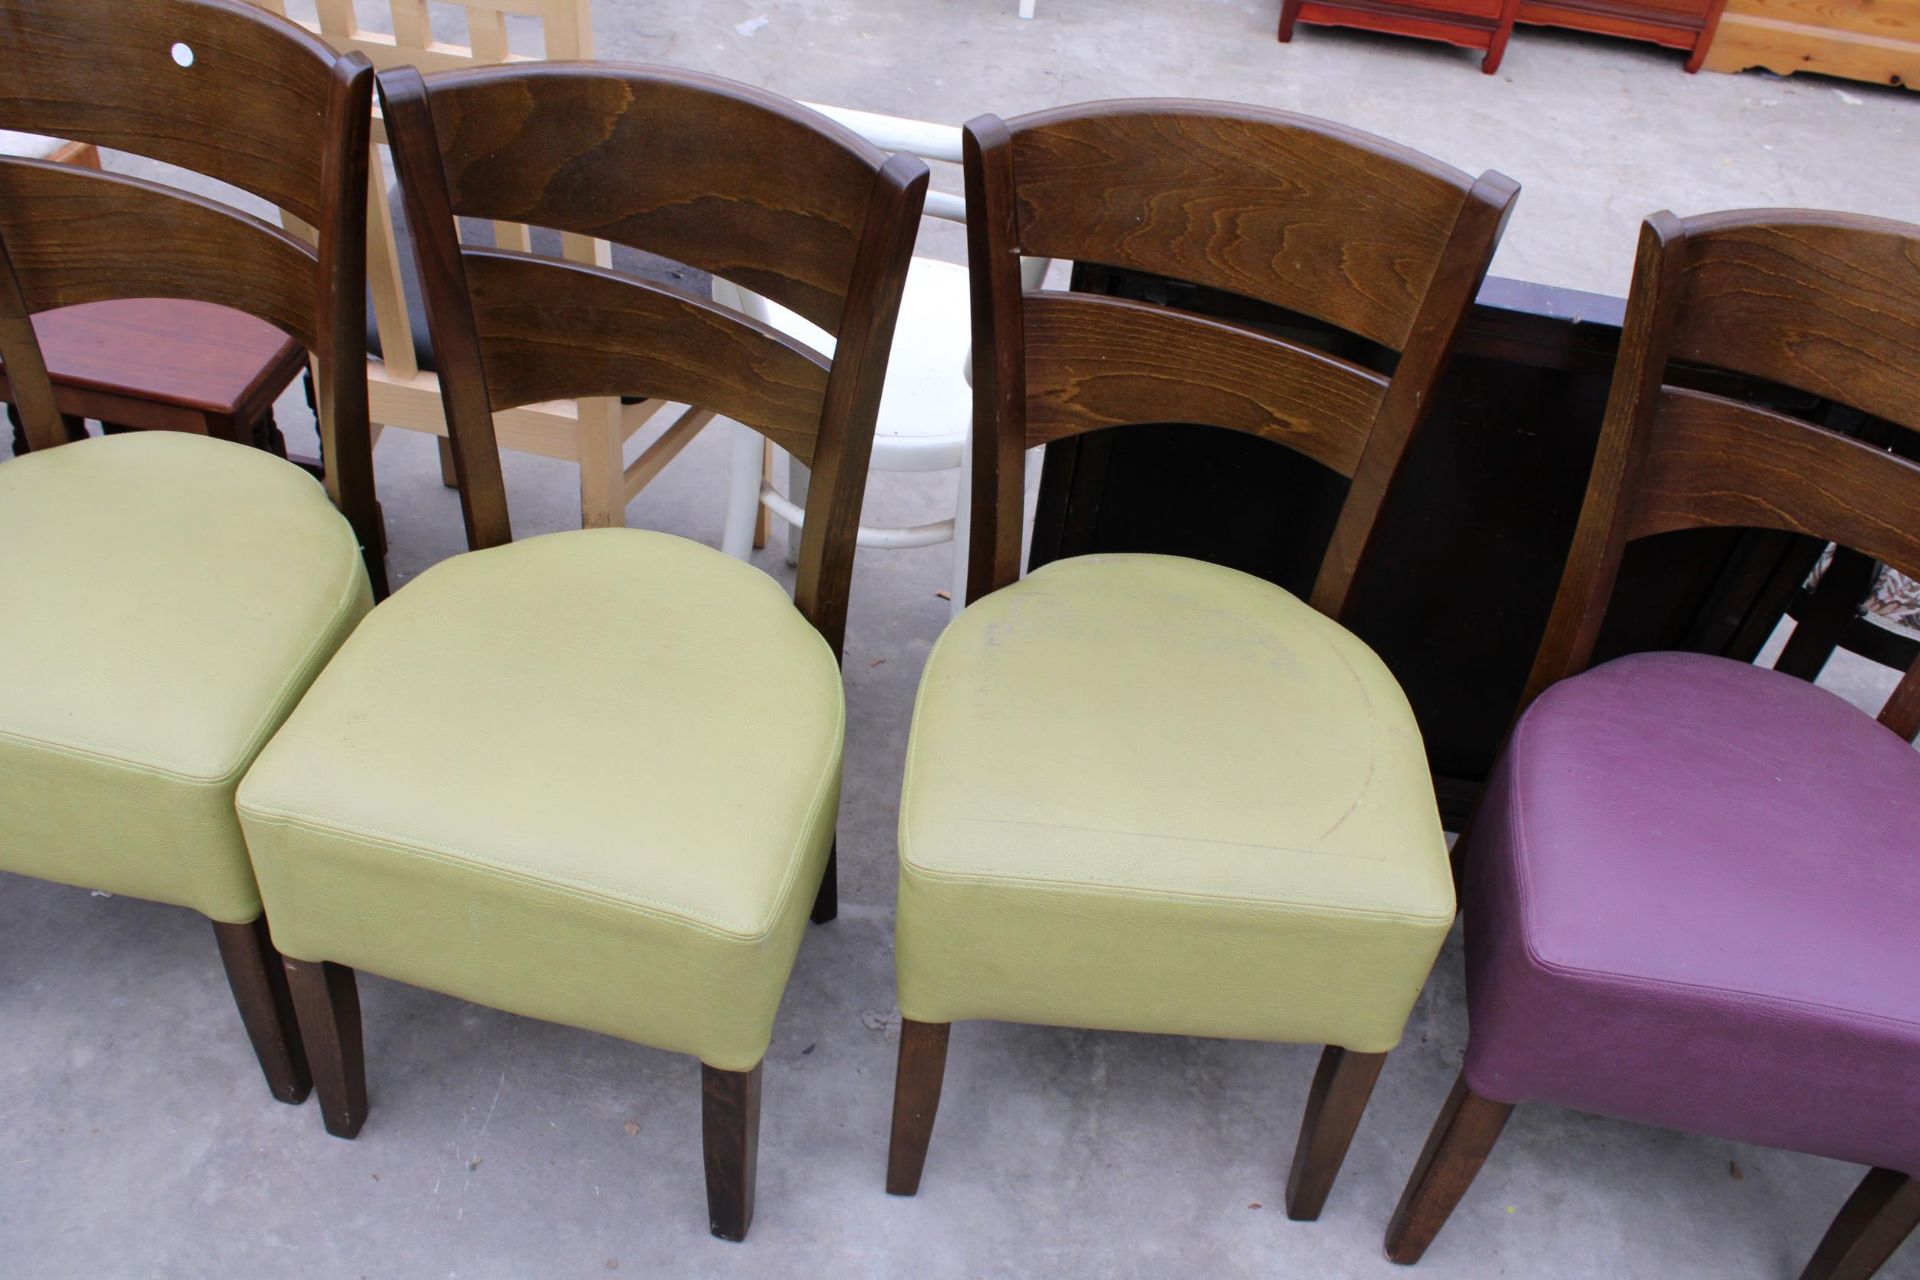 A SET OF FIVE MODERN GEOMETRIC FURNITURE DINING CHAIRS WITH FAUX LEATHER STRAP - Image 3 of 3